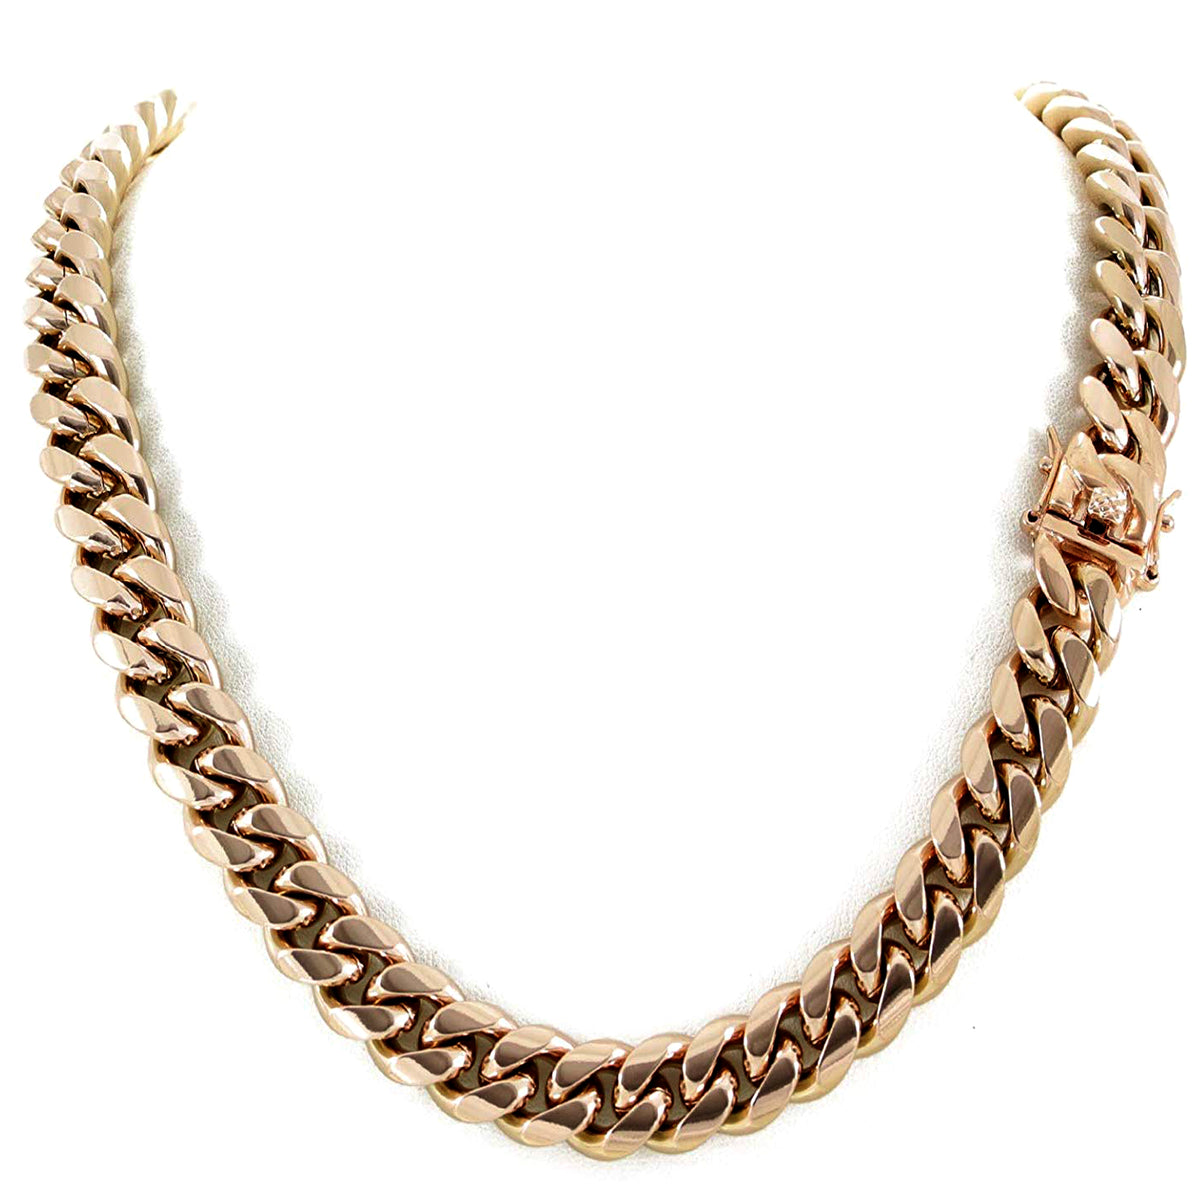 Width 2/4/6mm Stainless Steel Gold Rope Chain Necklace Statement